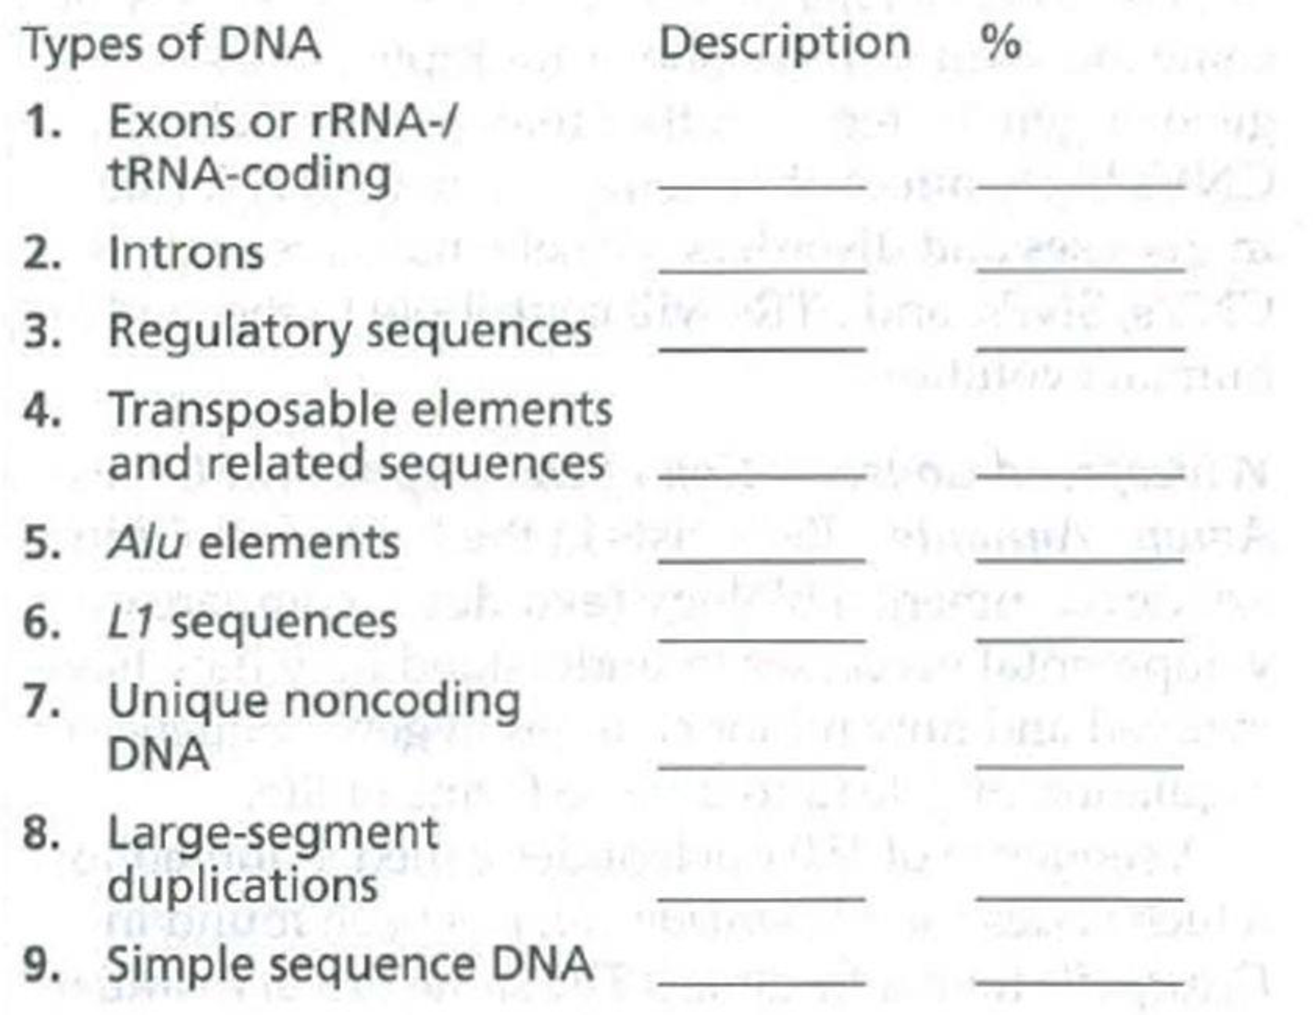 Chapter 21, Problem 5IQ, For each of the following types of DNA sequences found in the human genome, write the letter of the 